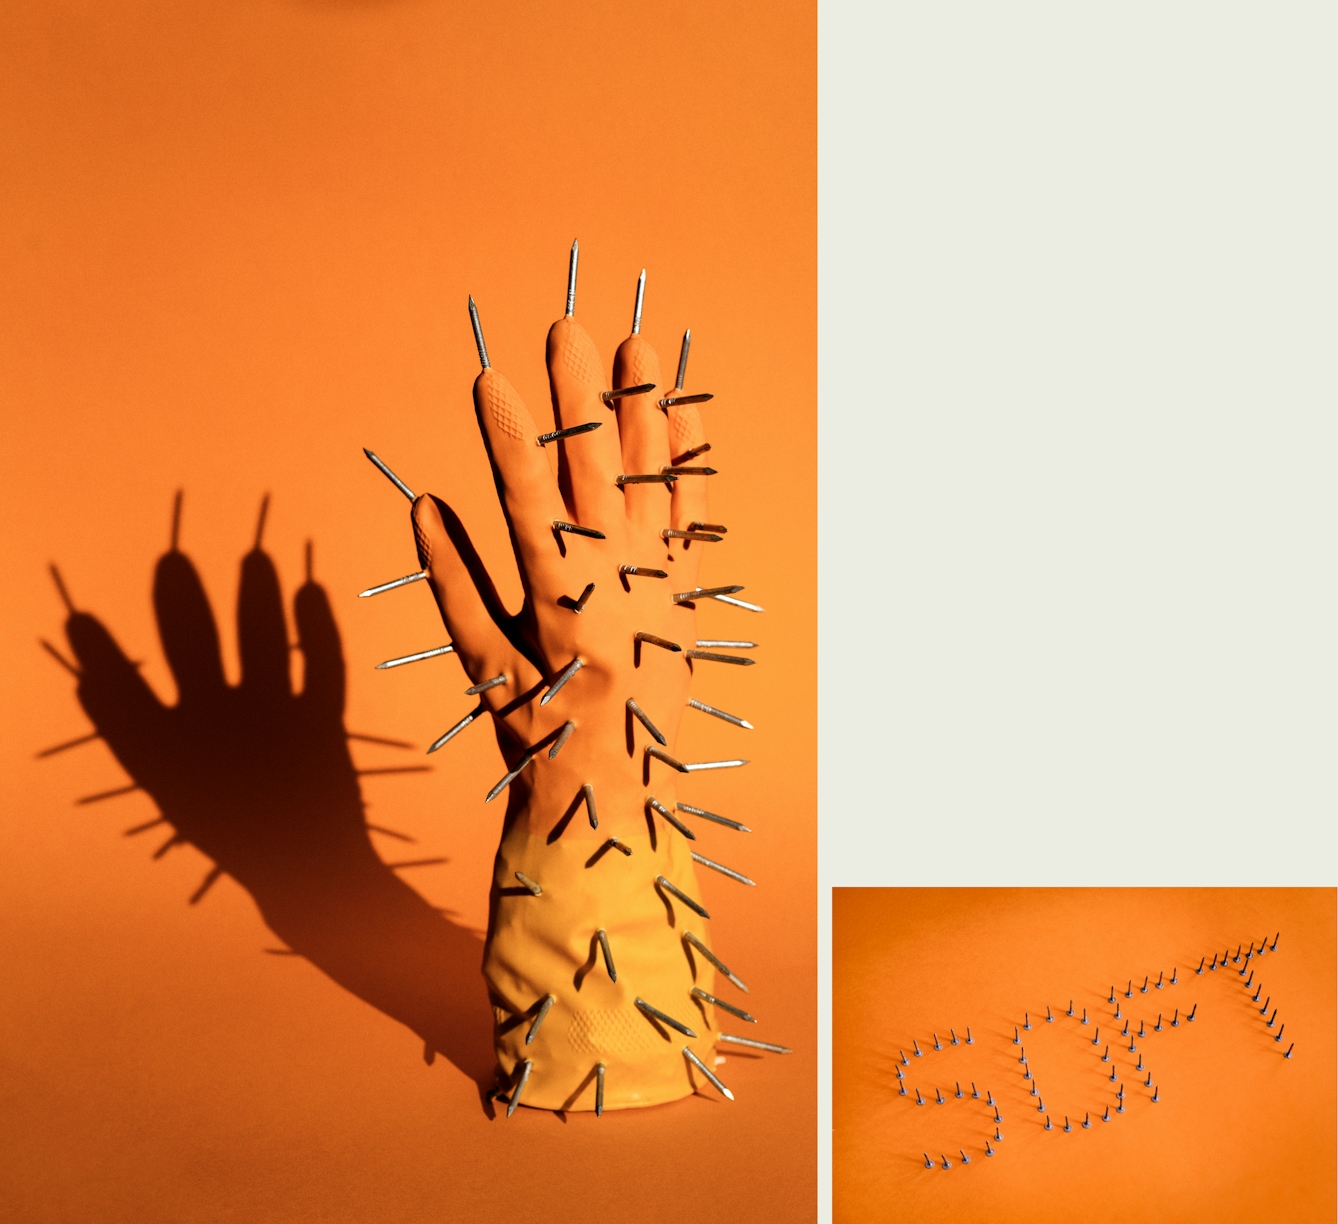 Photographic diptych, one large vertical image on the left and one smaller horizontal image on the right. The one on the left shows the right hand of a pair of rubber gloves. The orange and yellow glove is standing upright, fingers into the air, on an orange background. The glove is padded so it looks as if there is a hand inside it. Sticking out of the glove all over the surface are metal carpentry nails, points outwards. The scene is lit by a hard contrasty light which is casting a long dark shadow of the glove and nails onto the background. The image on the right shows the word 'SOFT' spelt out with metal carpentry nails balancing vertically on their heads, on an orange  background.